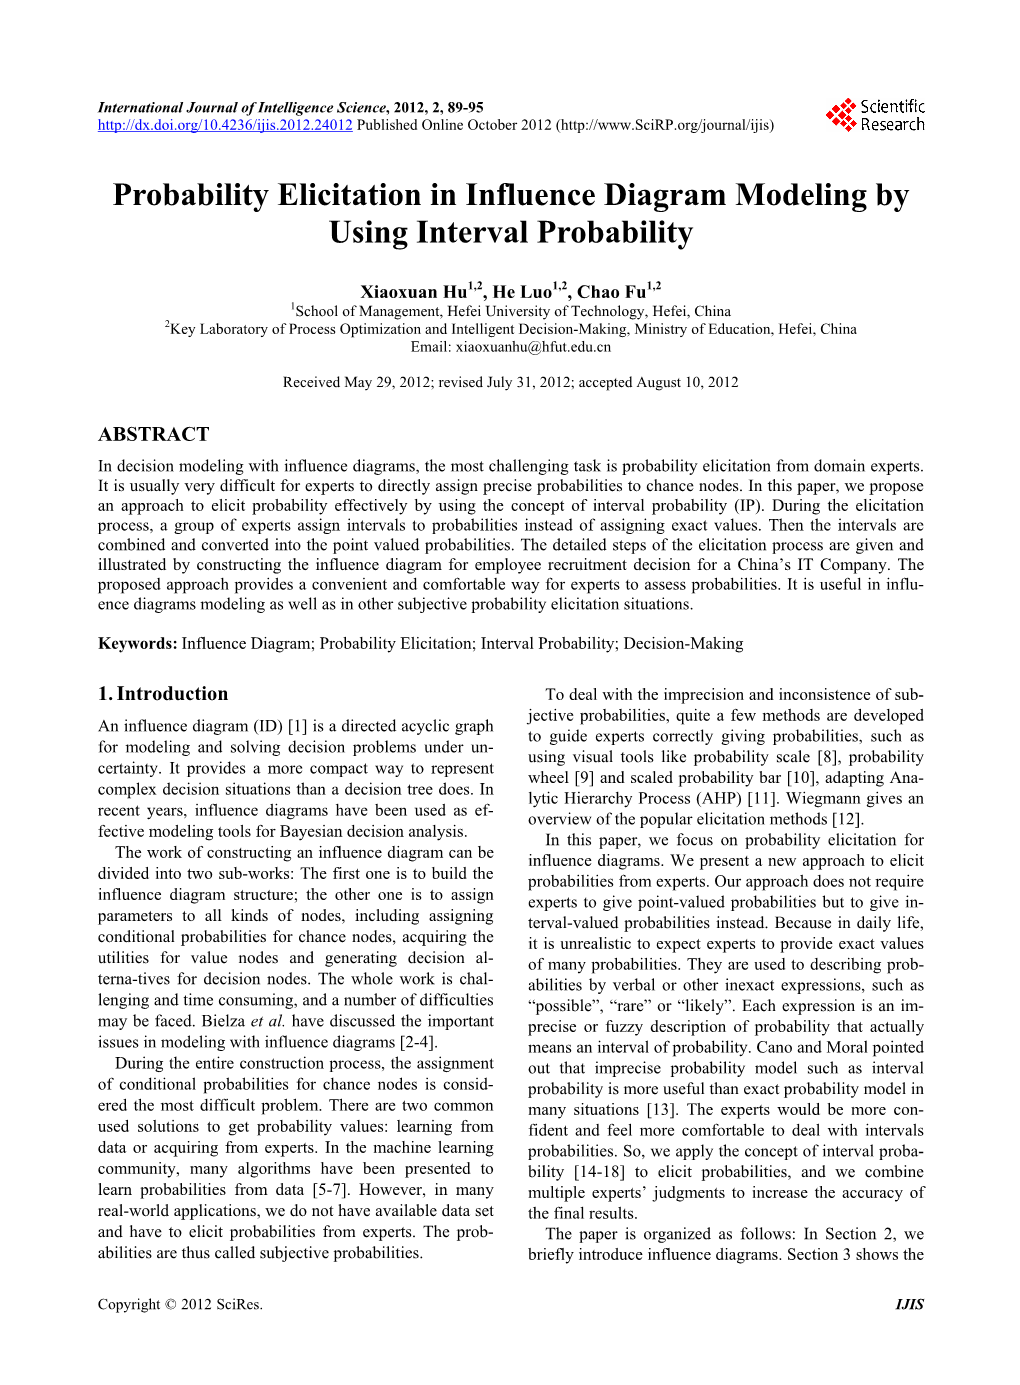 Probability Elicitation in Influence Diagram Modeling by Using Interval Probability